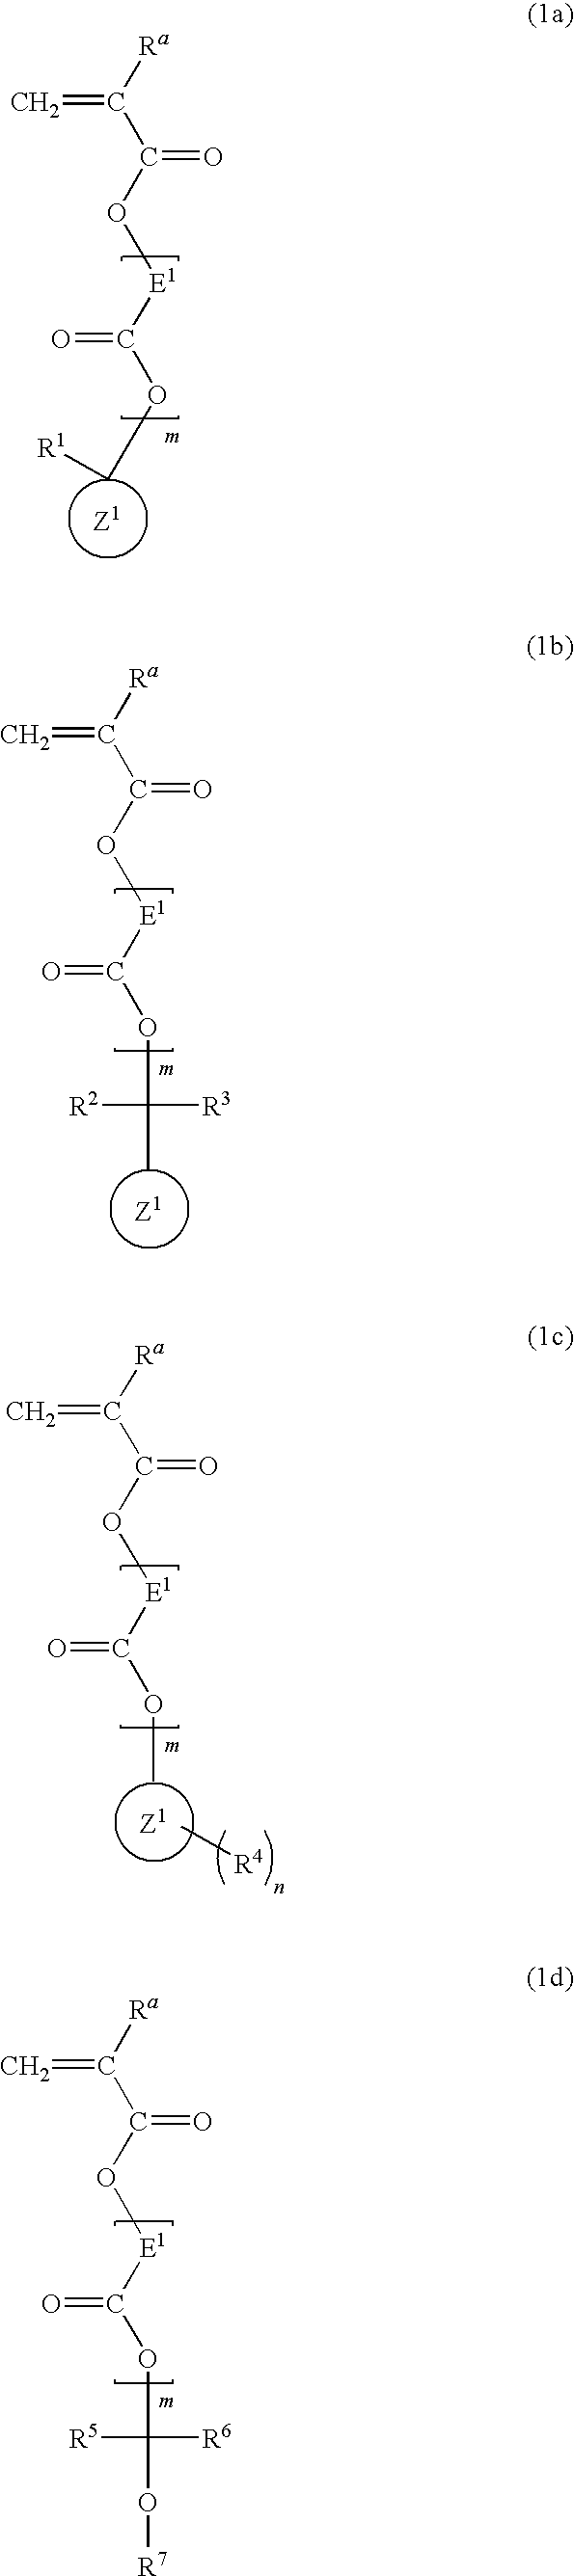 Process for producing photoresist polymeric compounds